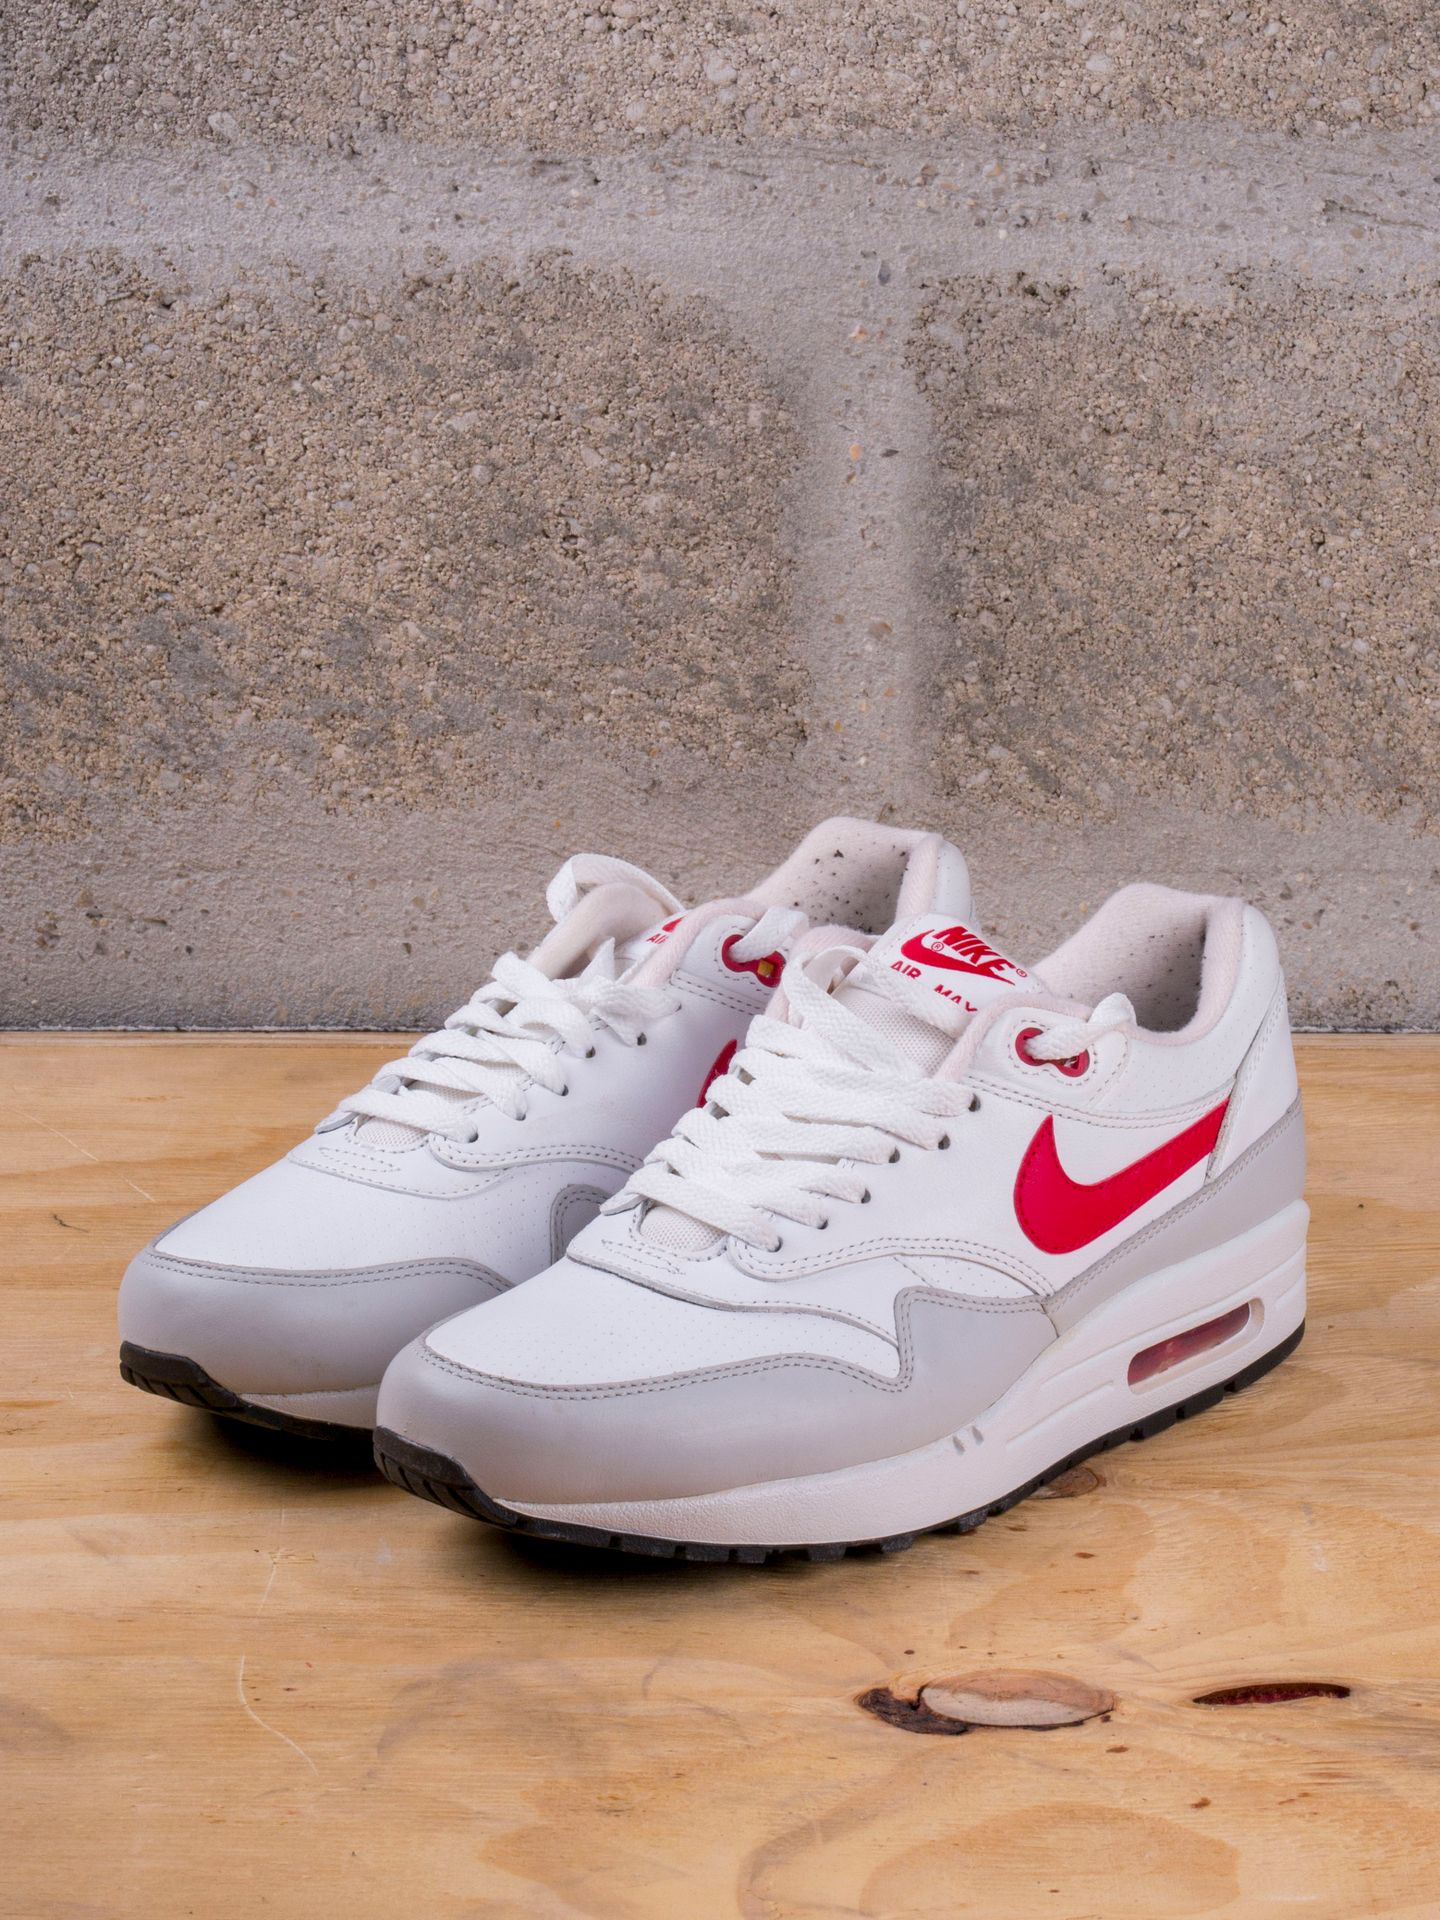 Null NIKE AIR MAX 1

White University Red Cool Grey

(654466-102)

US 8 / EU 41
&hellip;